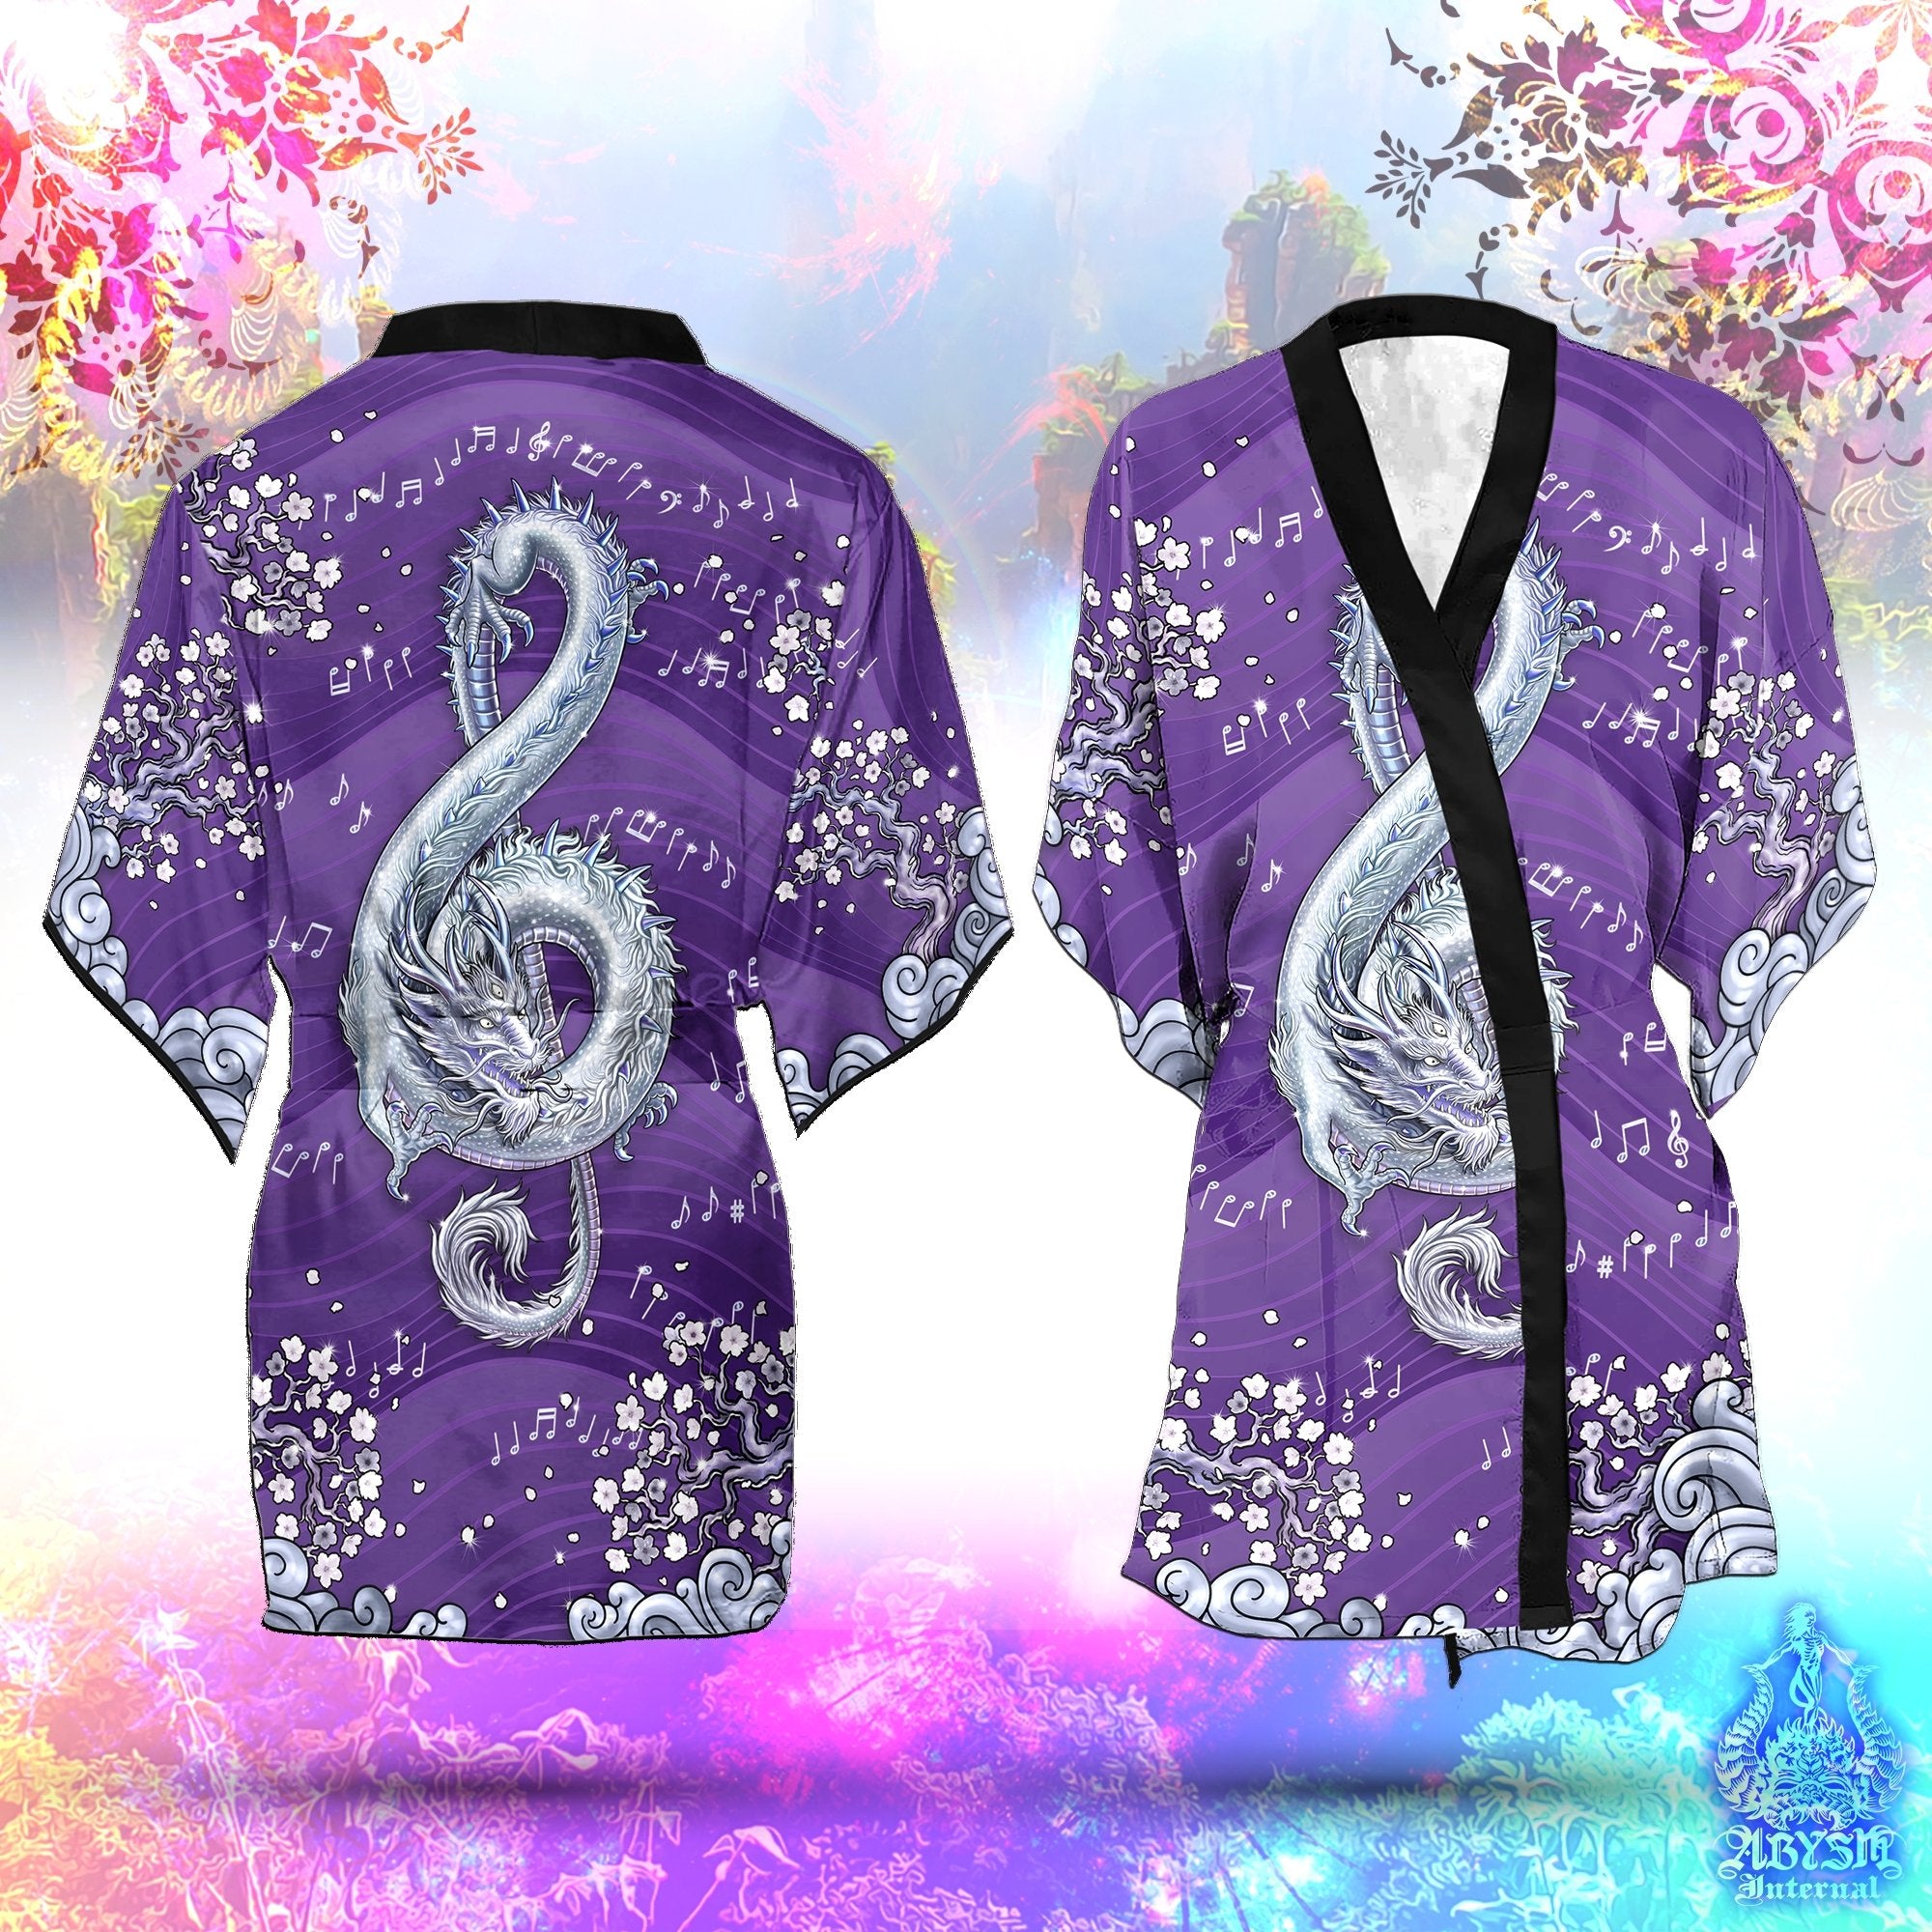 Music Cover Up, Beach Outfit, Party Kimono, Summer Festival Robe, Indie and Alternative Clothing, Unisex - Dragon, White Purple - Abysm Internal